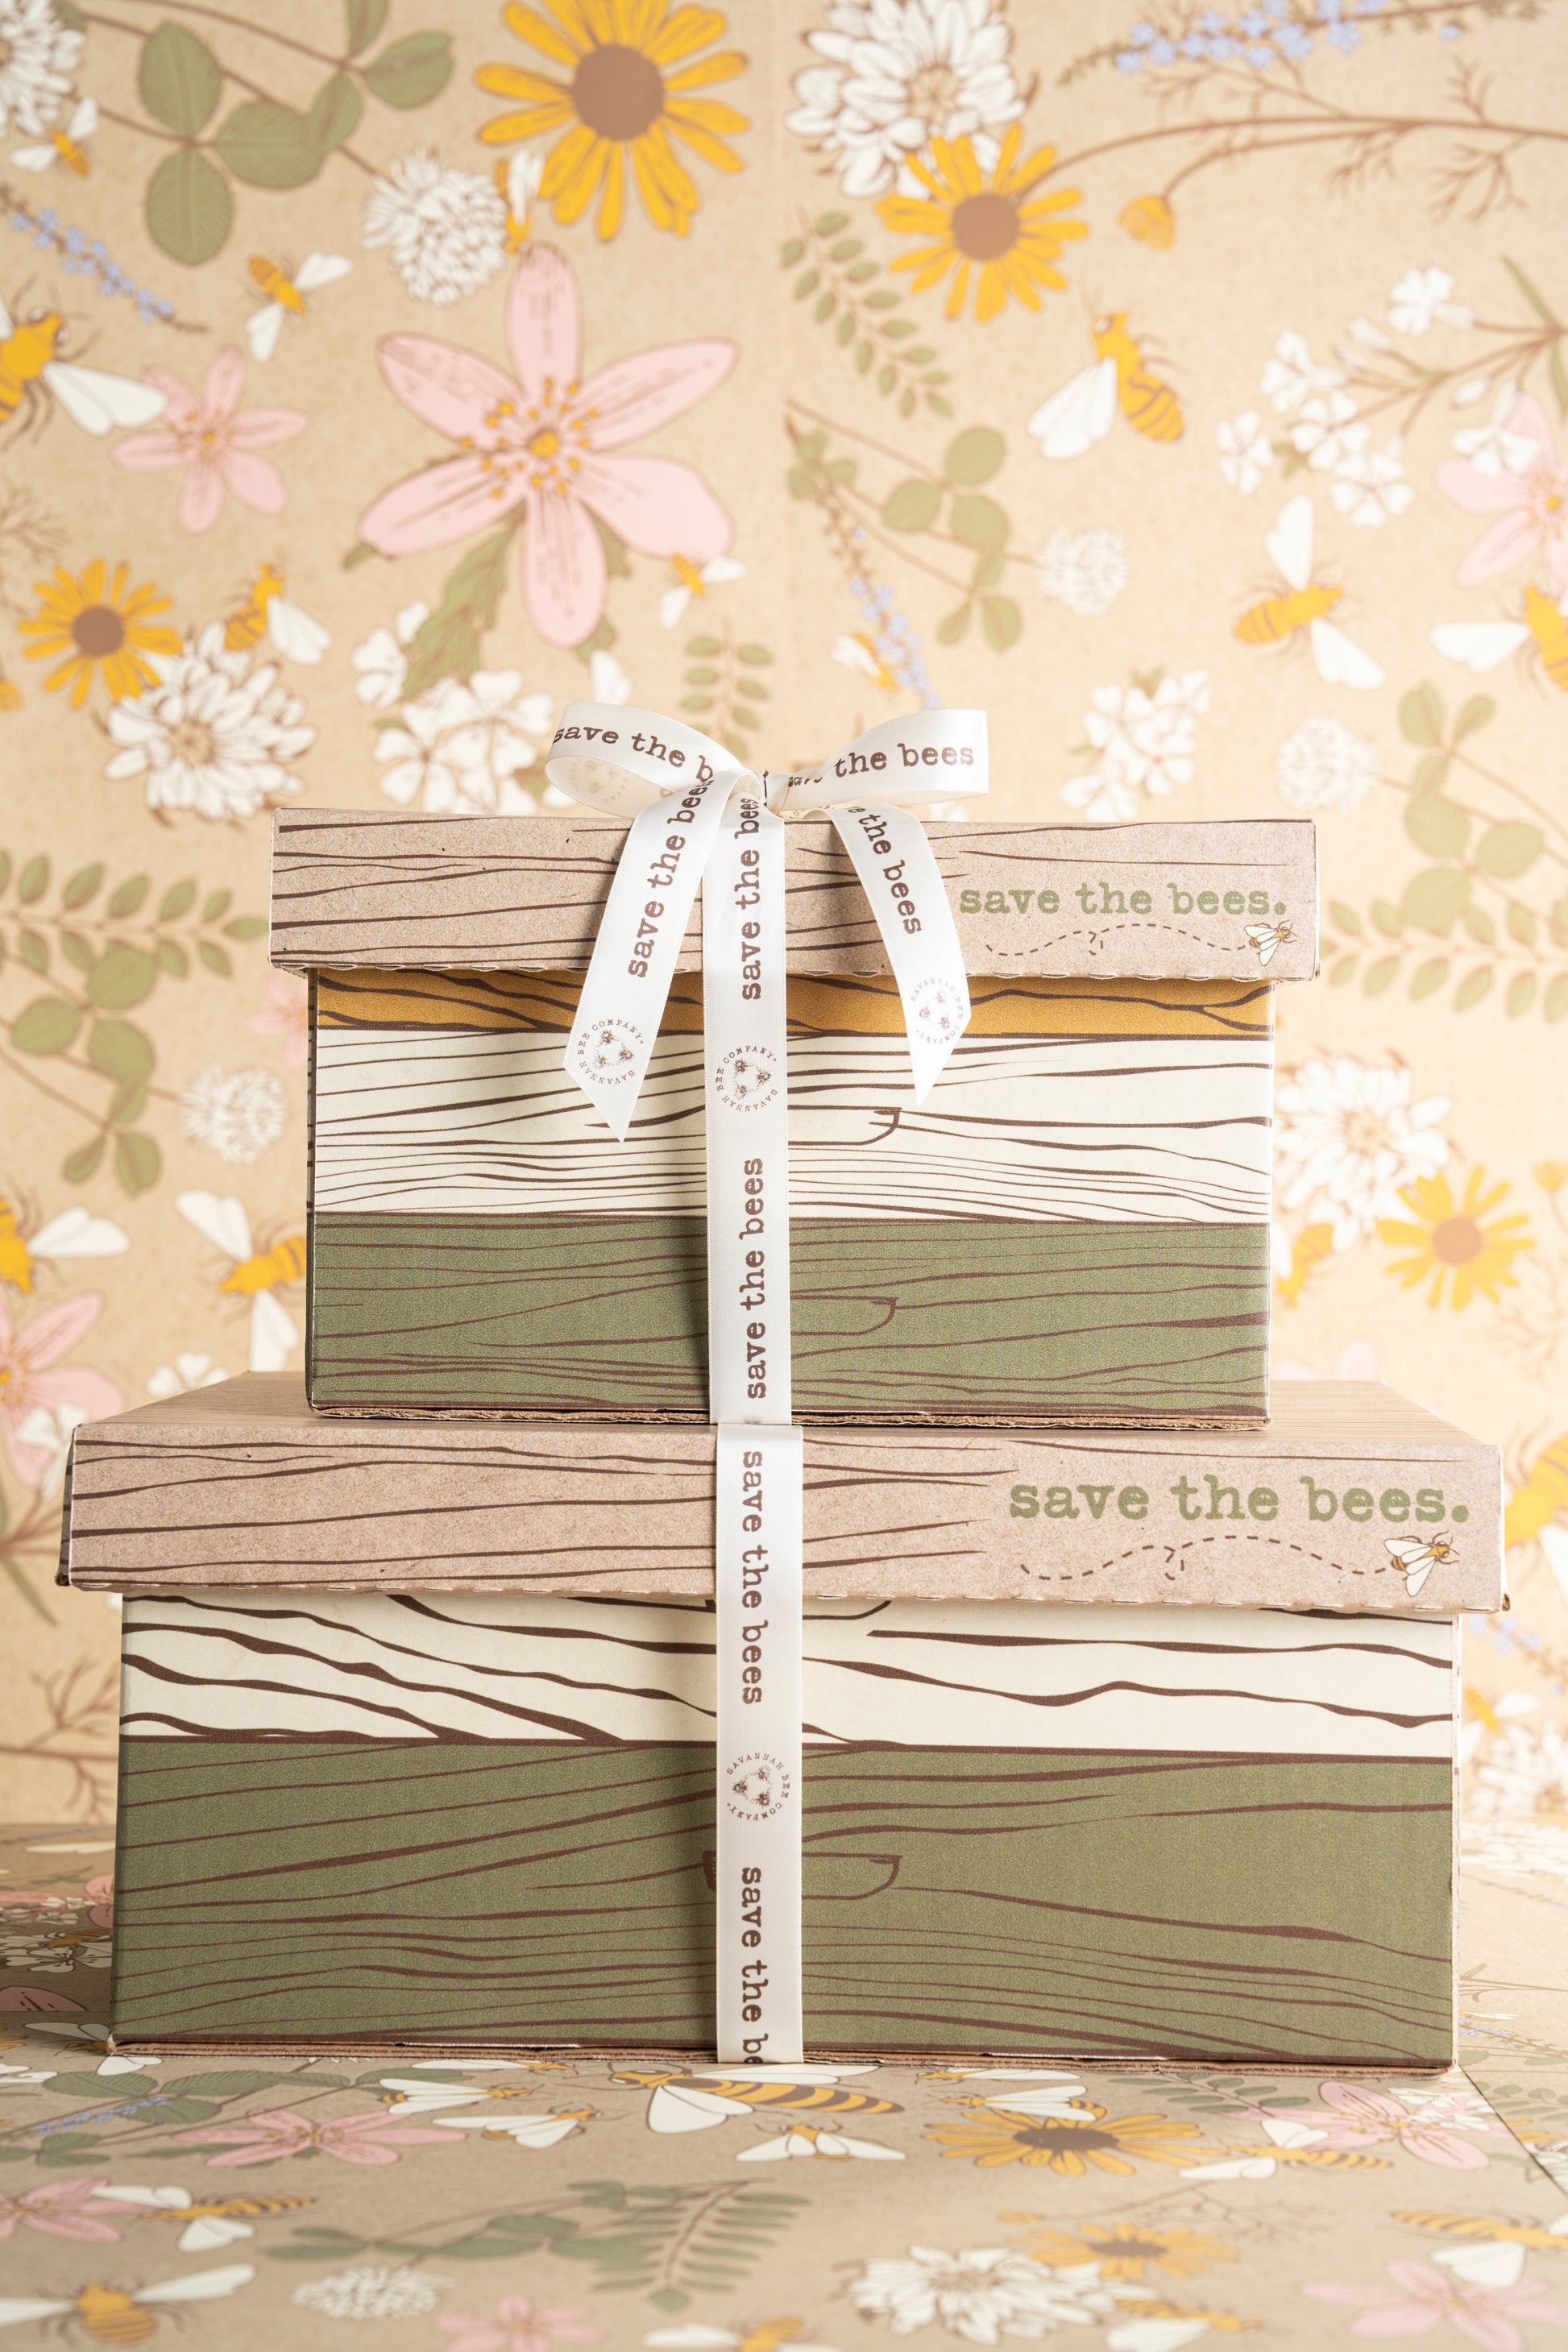 One small and one large save the bees gift boxes stacked on one another